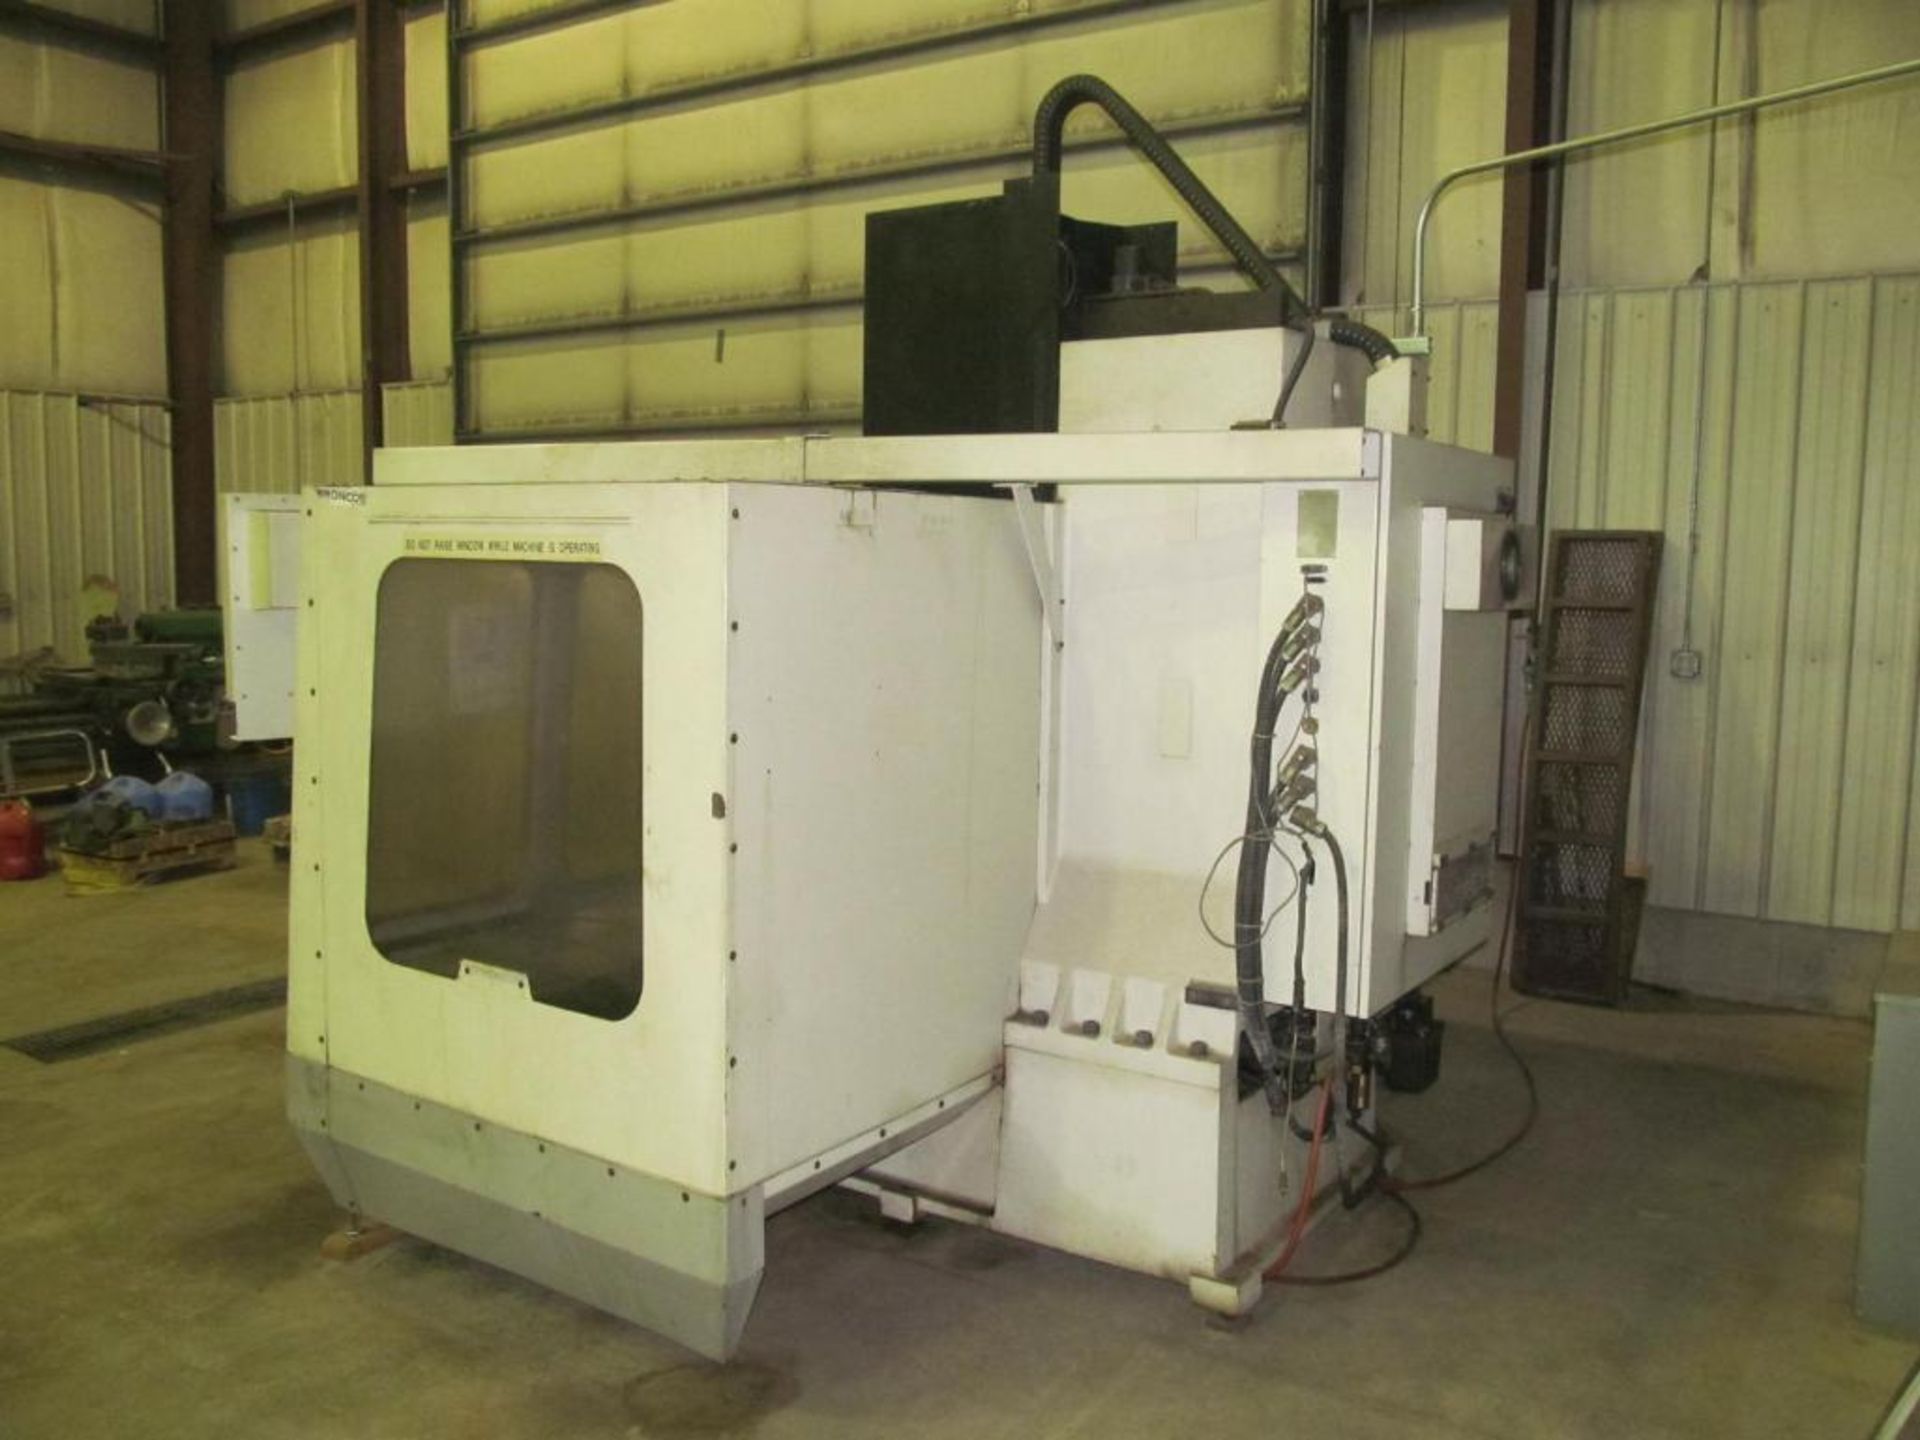 Haas VF-4 CNC Vertical Machining Center, S/N 2549 (New 1993), 18" x 52" Table, Travels: X-50"; Y-20" - Image 2 of 6